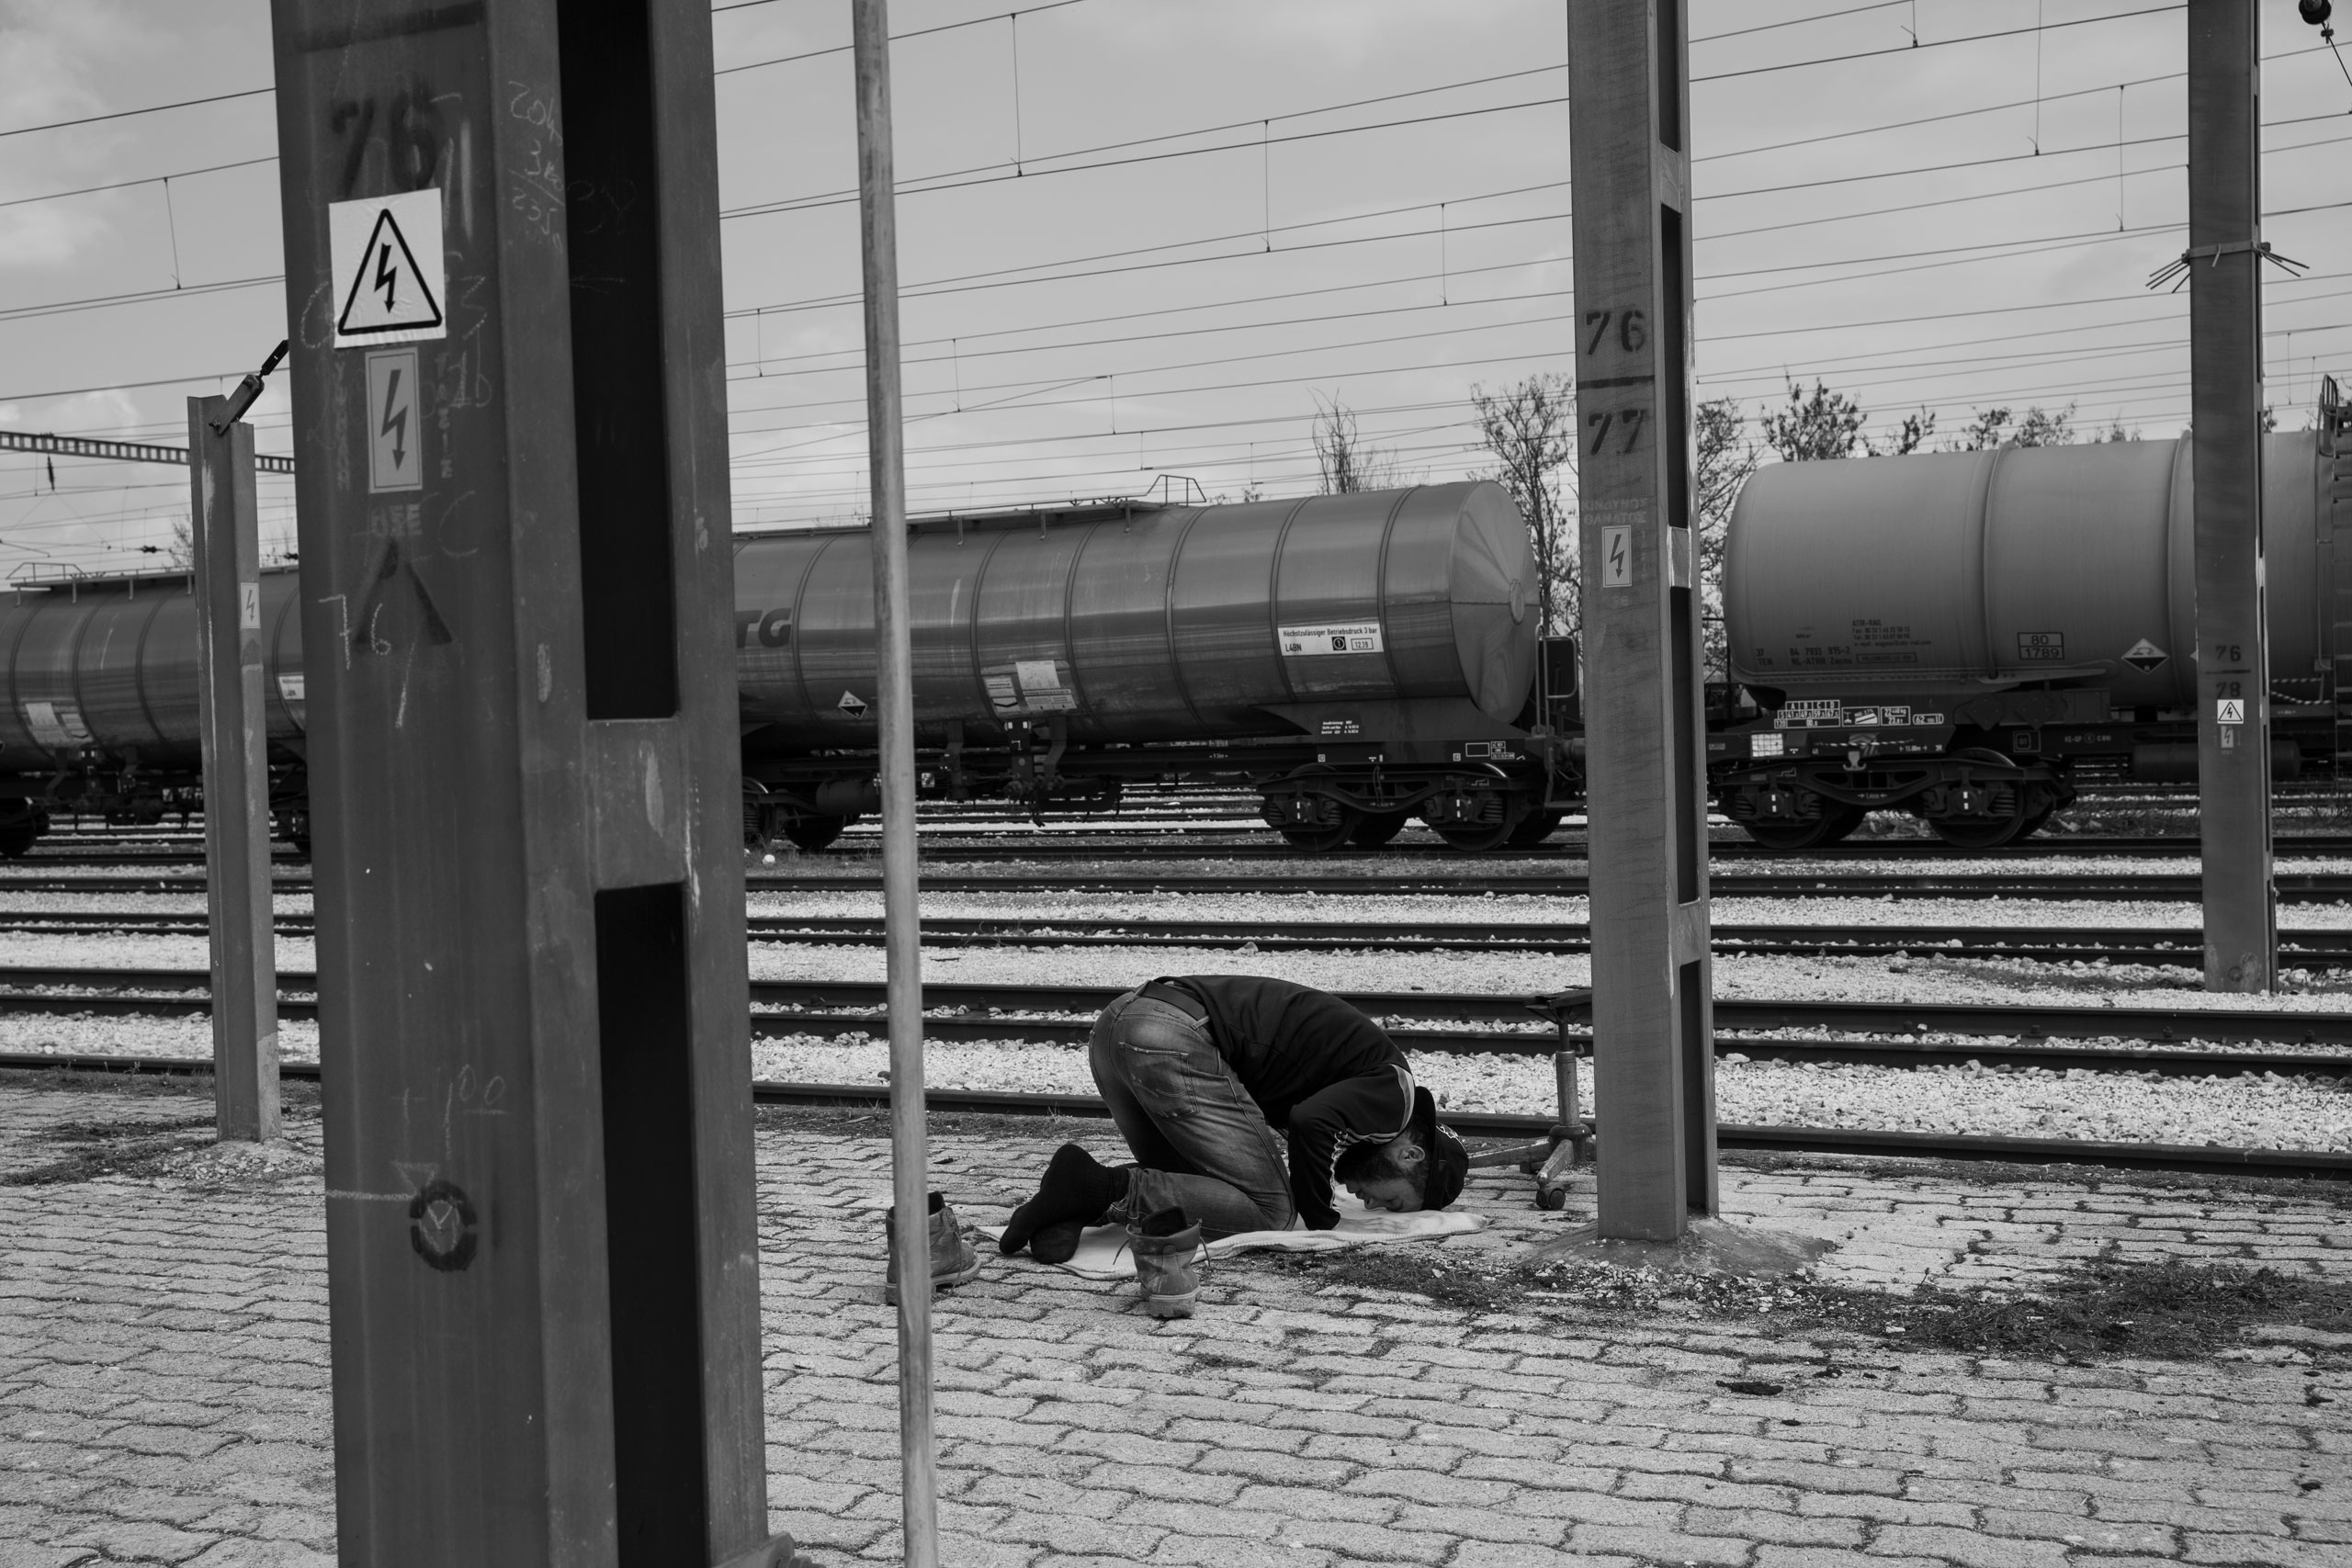 A man prays near the railroad tracks in the Idomeni refugee camp at the Greece Macedonia border, where thousands of refugees now seek shelter, as they are unable to make their way further north in Europe, March 18, 2016.